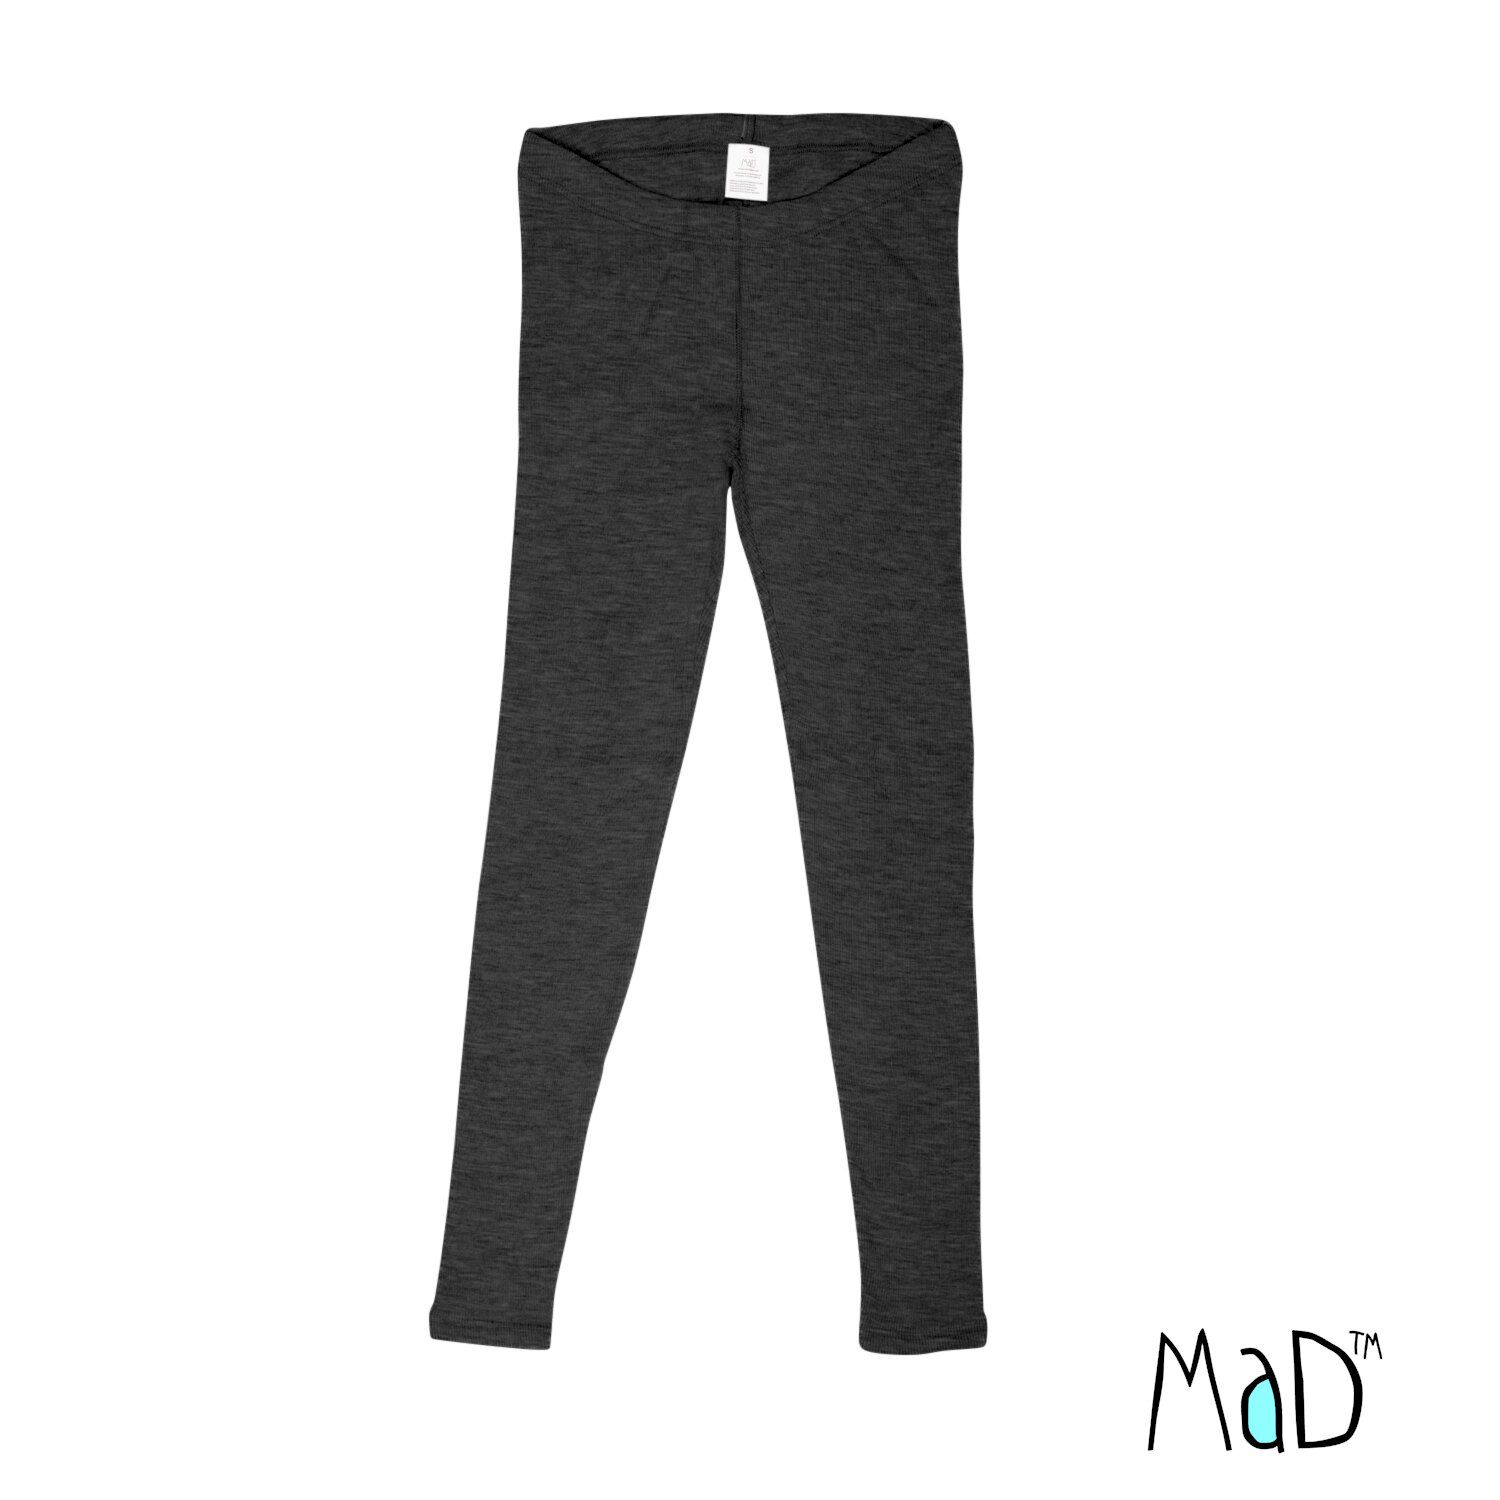 MaD Thermal-Hose aus Wolle